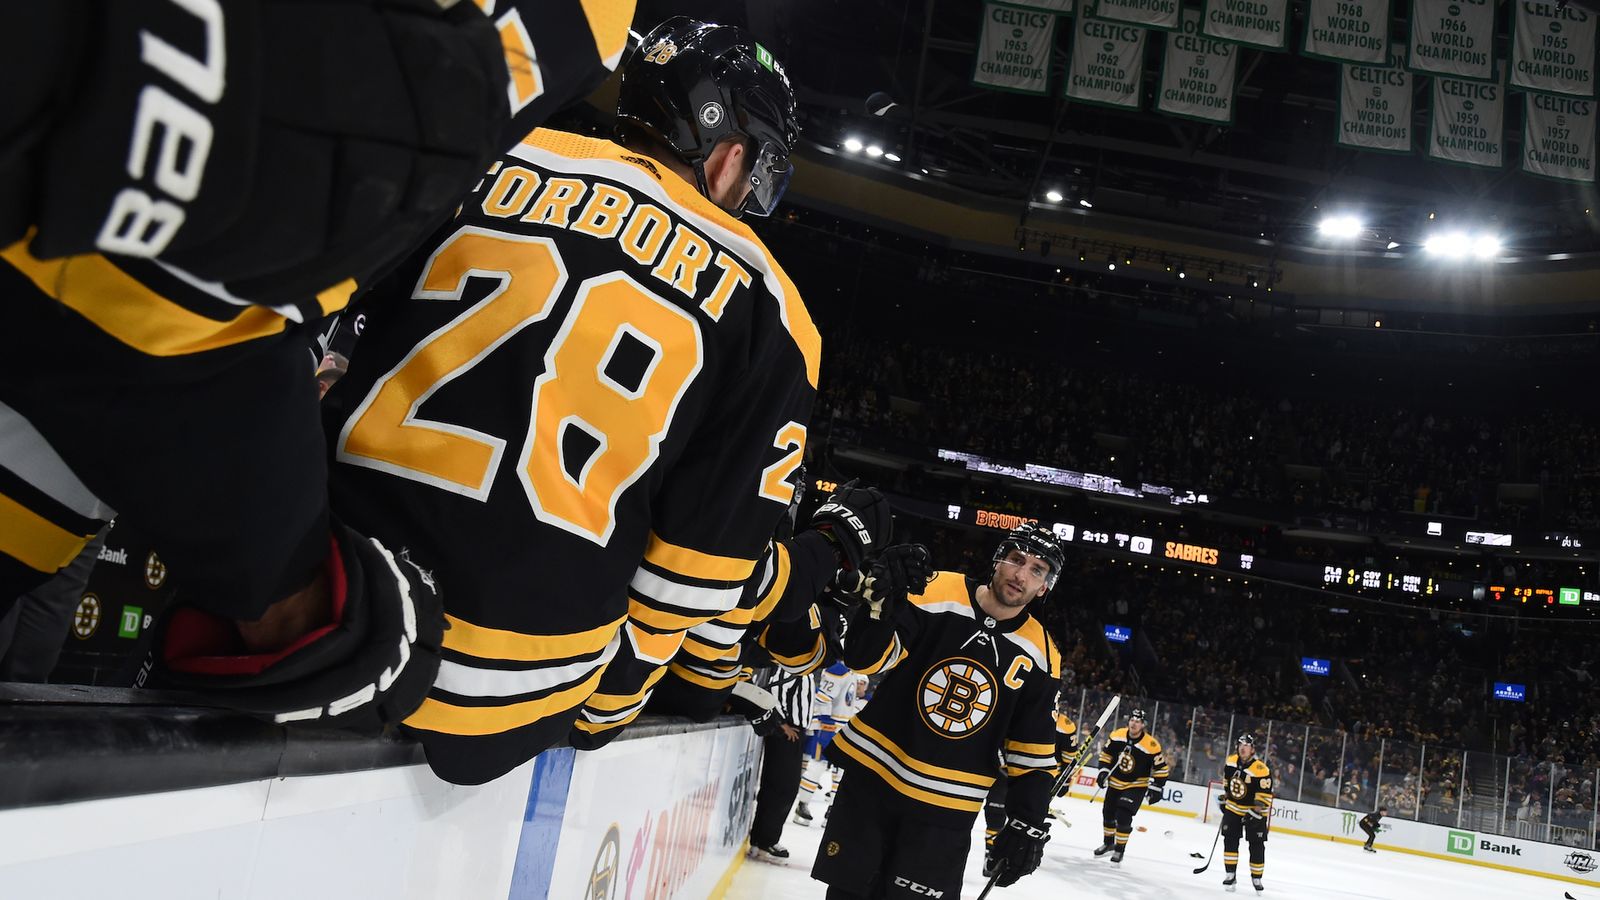 No Bergeron But Ullmark Starts For Bruins In Game 1